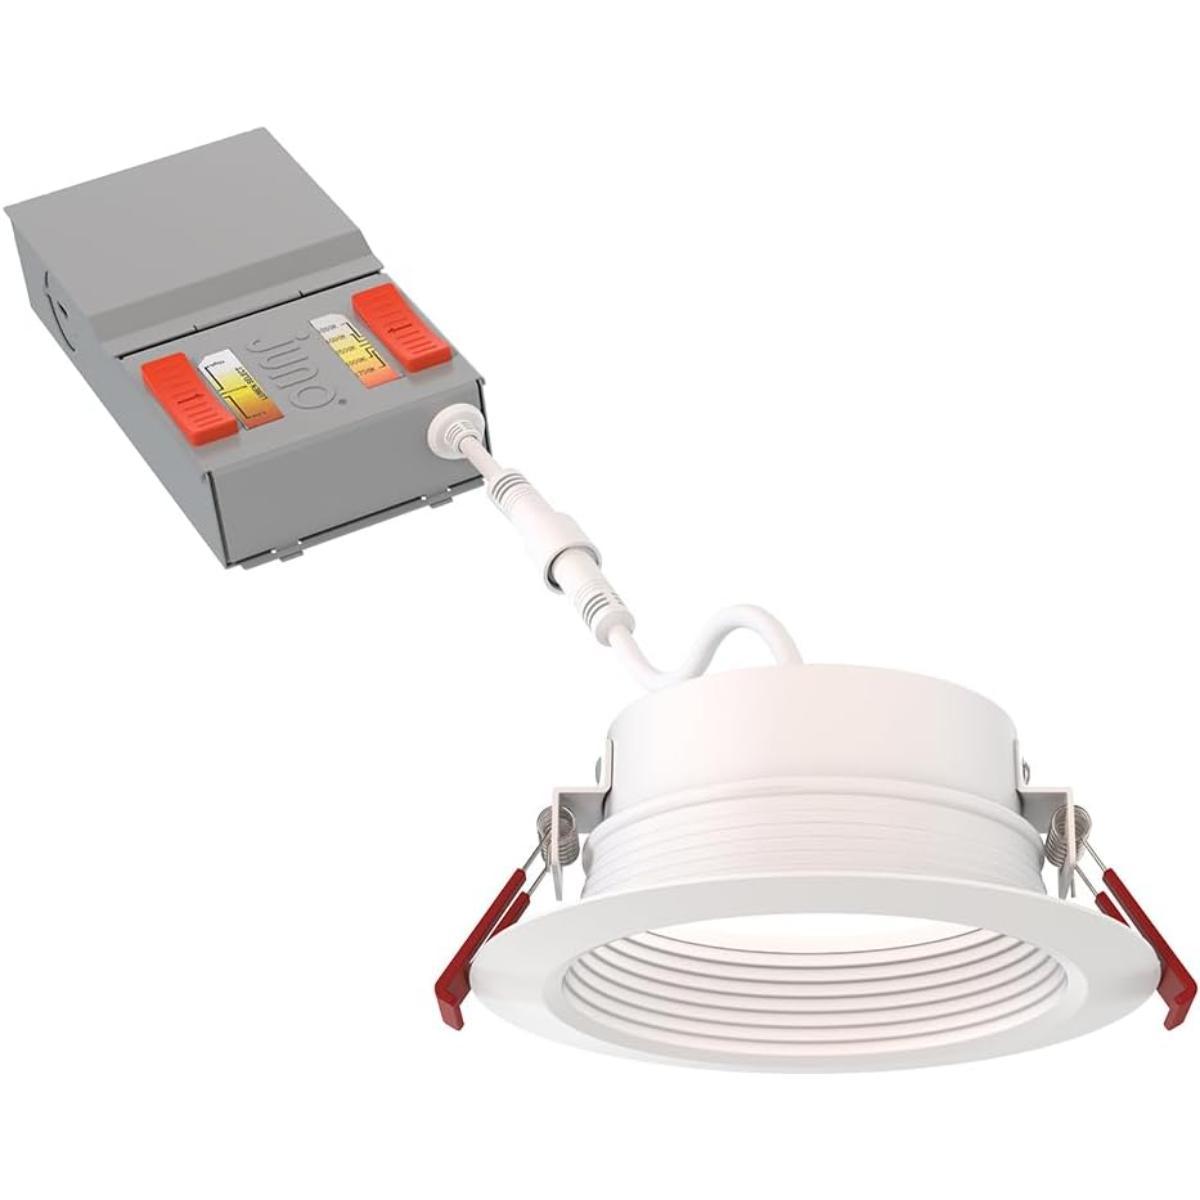 4 inch Deep Regress LED Canless Wafer Downlight, 15W, Adjustable 700/900/1100 Lumens, Selectable CCT, 2700K to 5000K, Baffle Trim - Bees Lighting